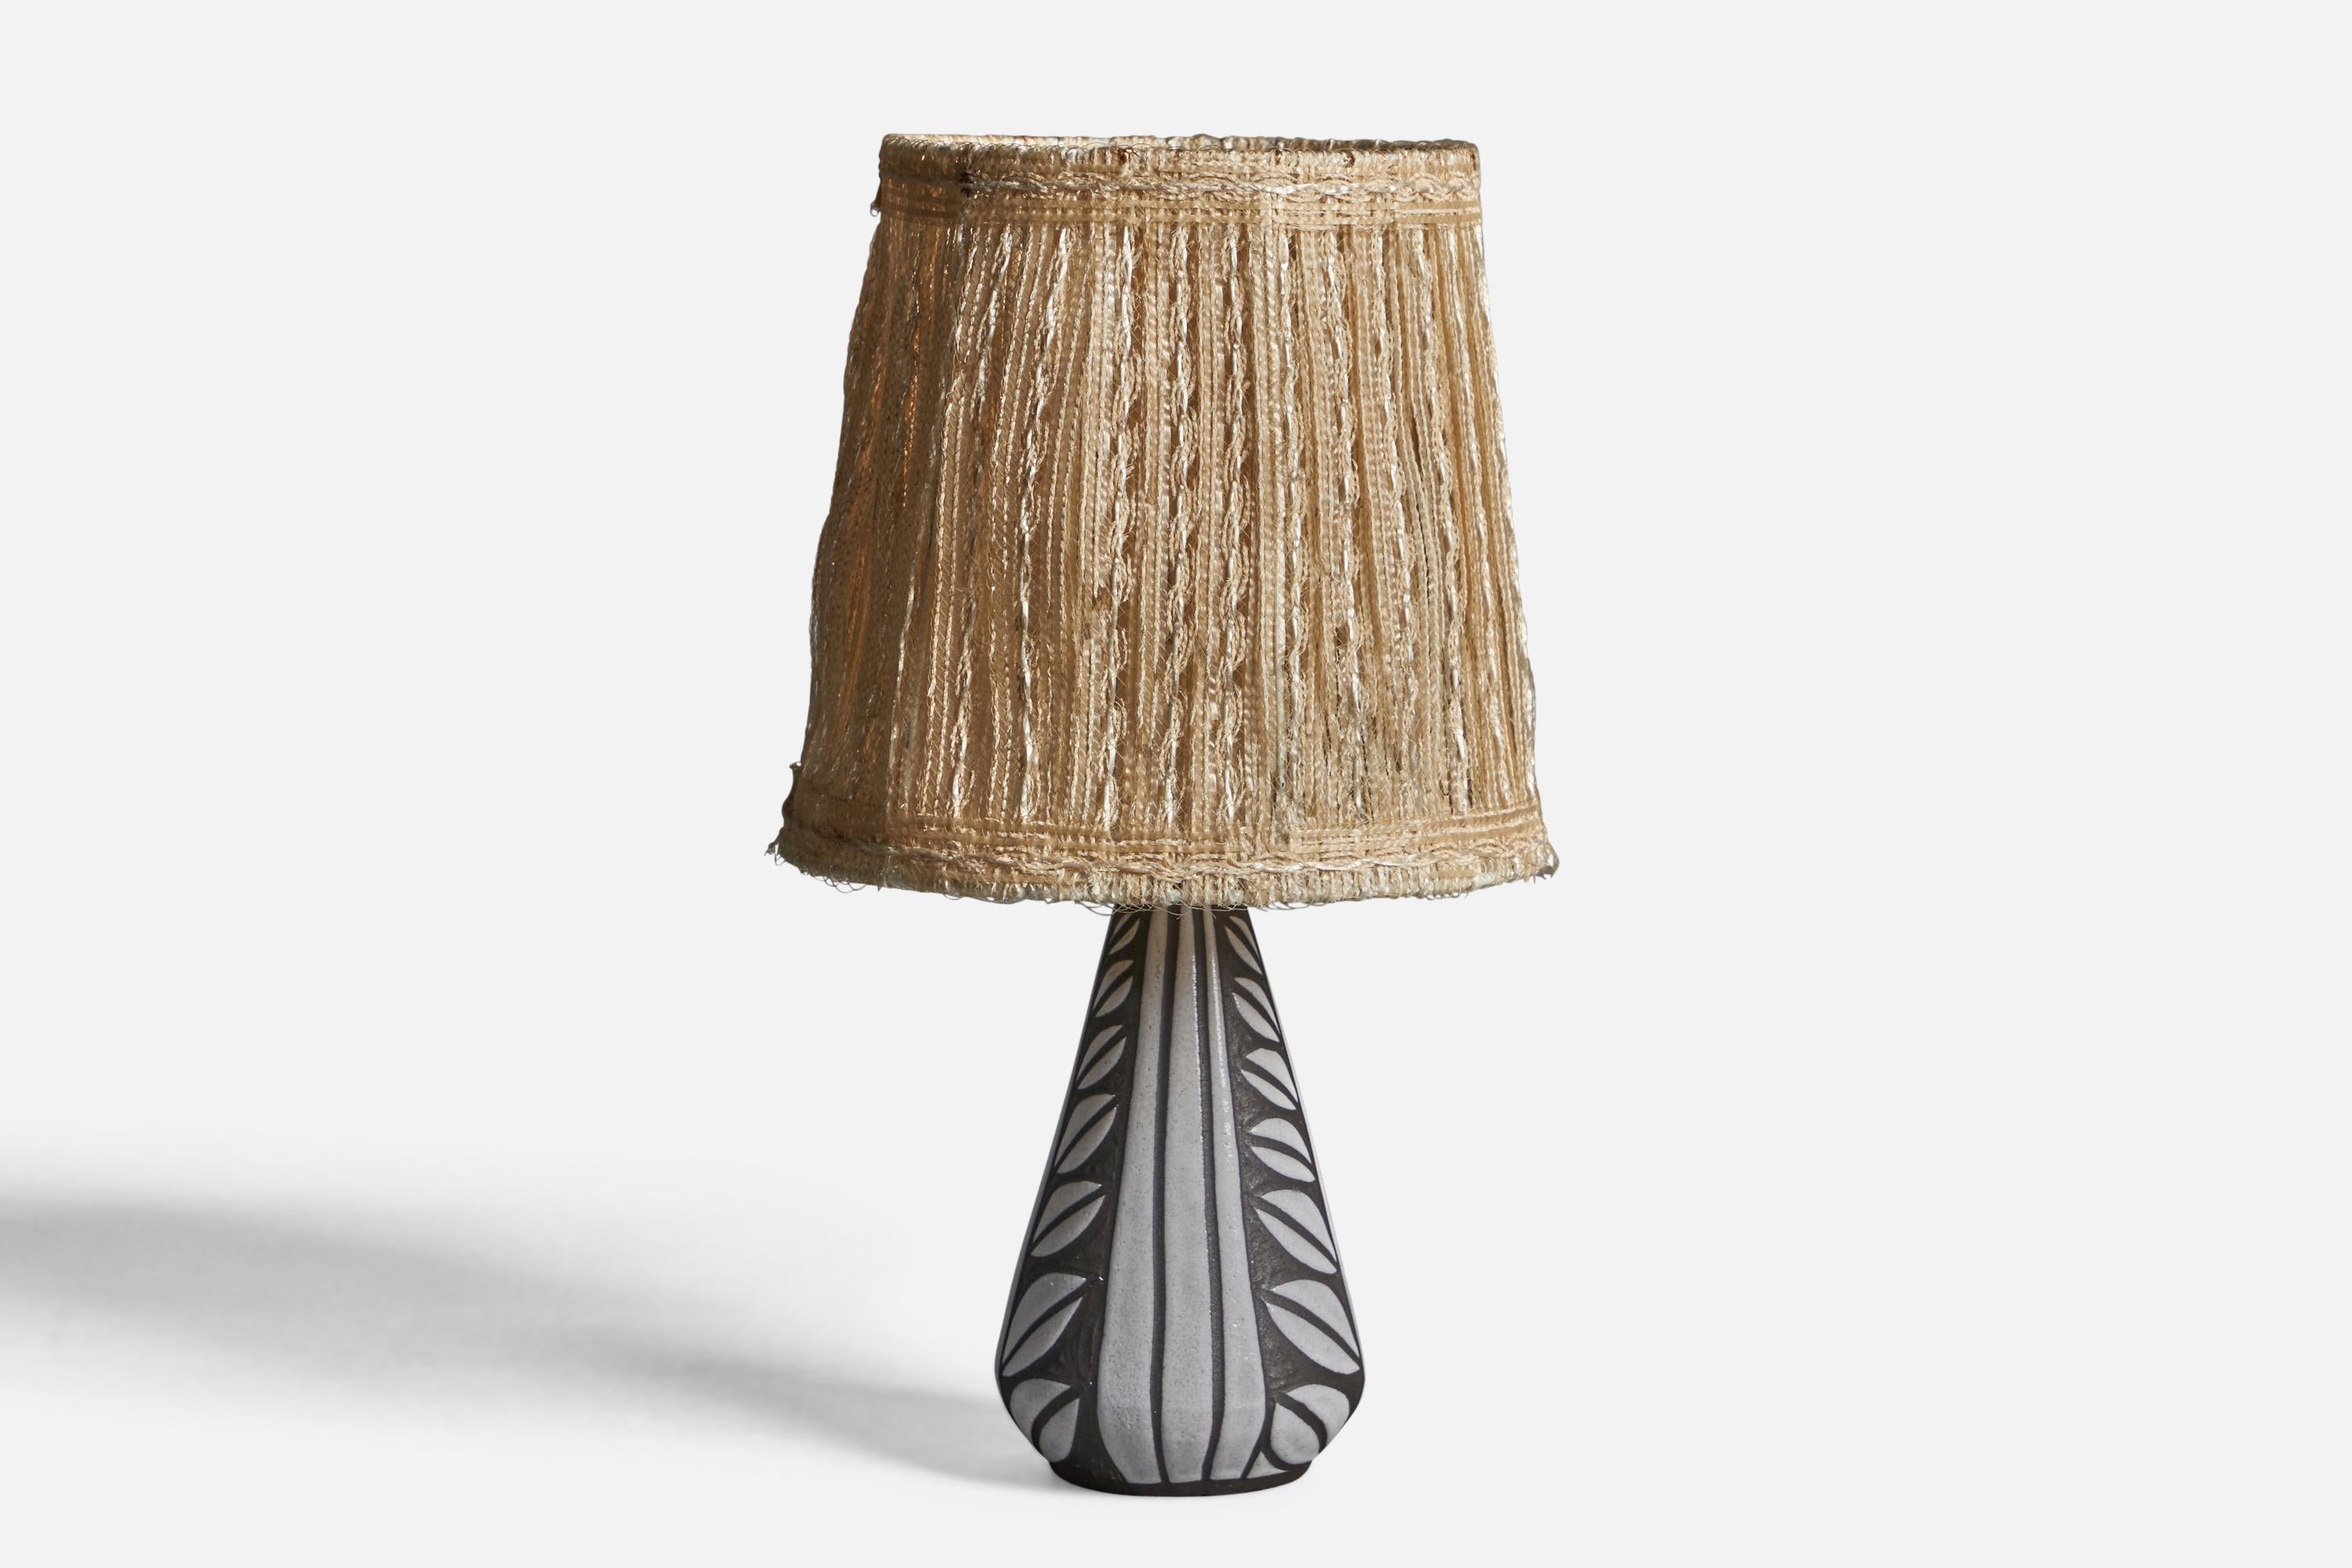 A grey stoneware and woven fabric table lamp, designed and produced in Denmark, 1960s.

Overall Dimensions (inches): 12.75